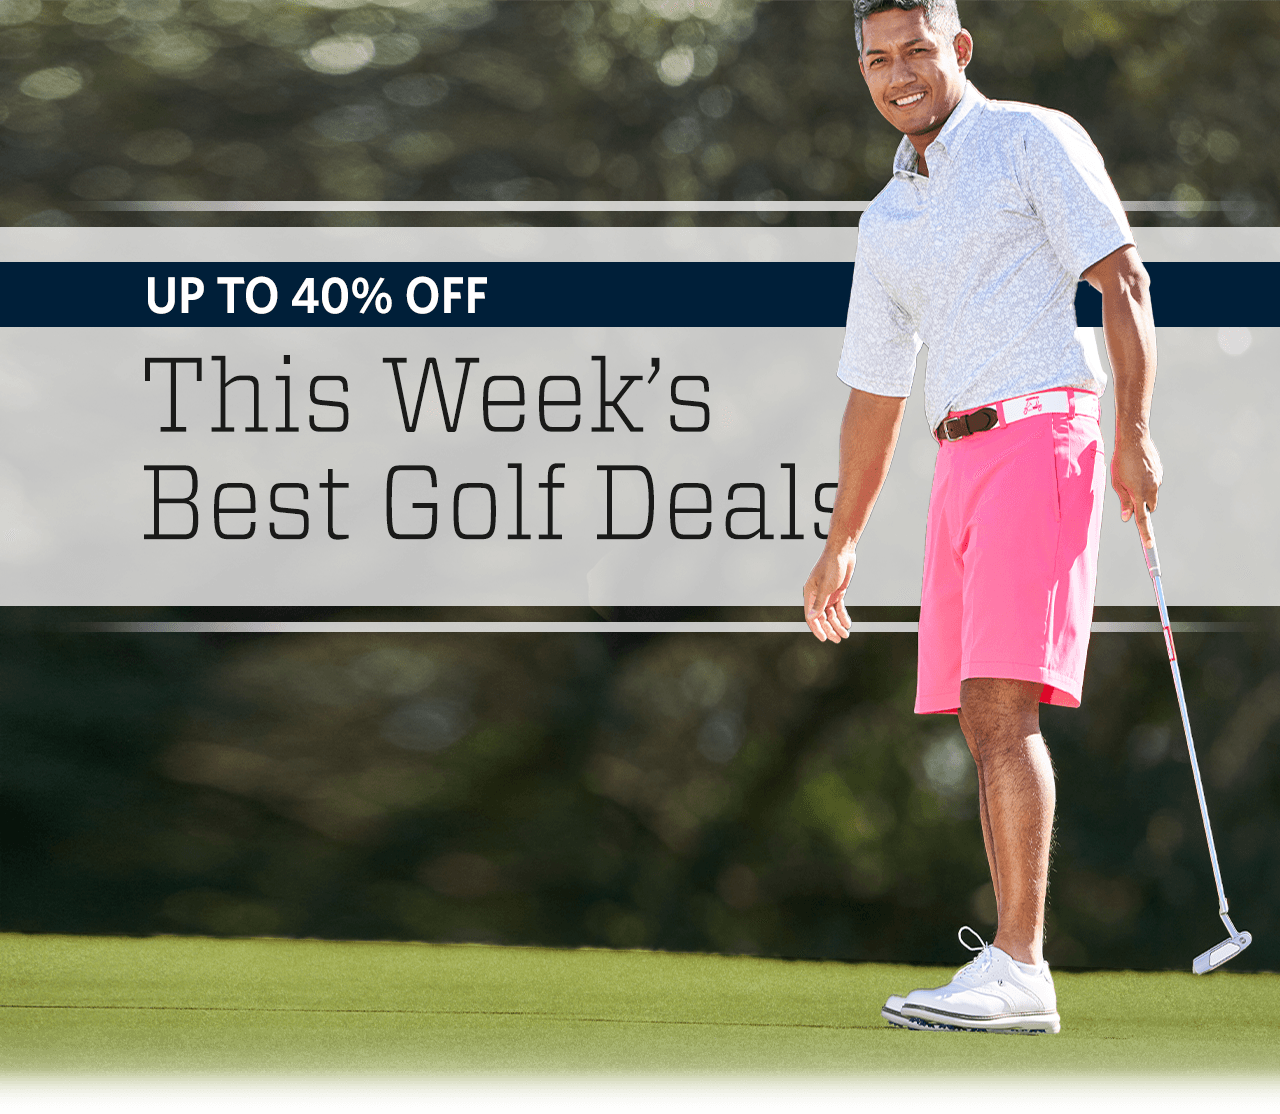 Up to 40% off. This week's best golf deals.